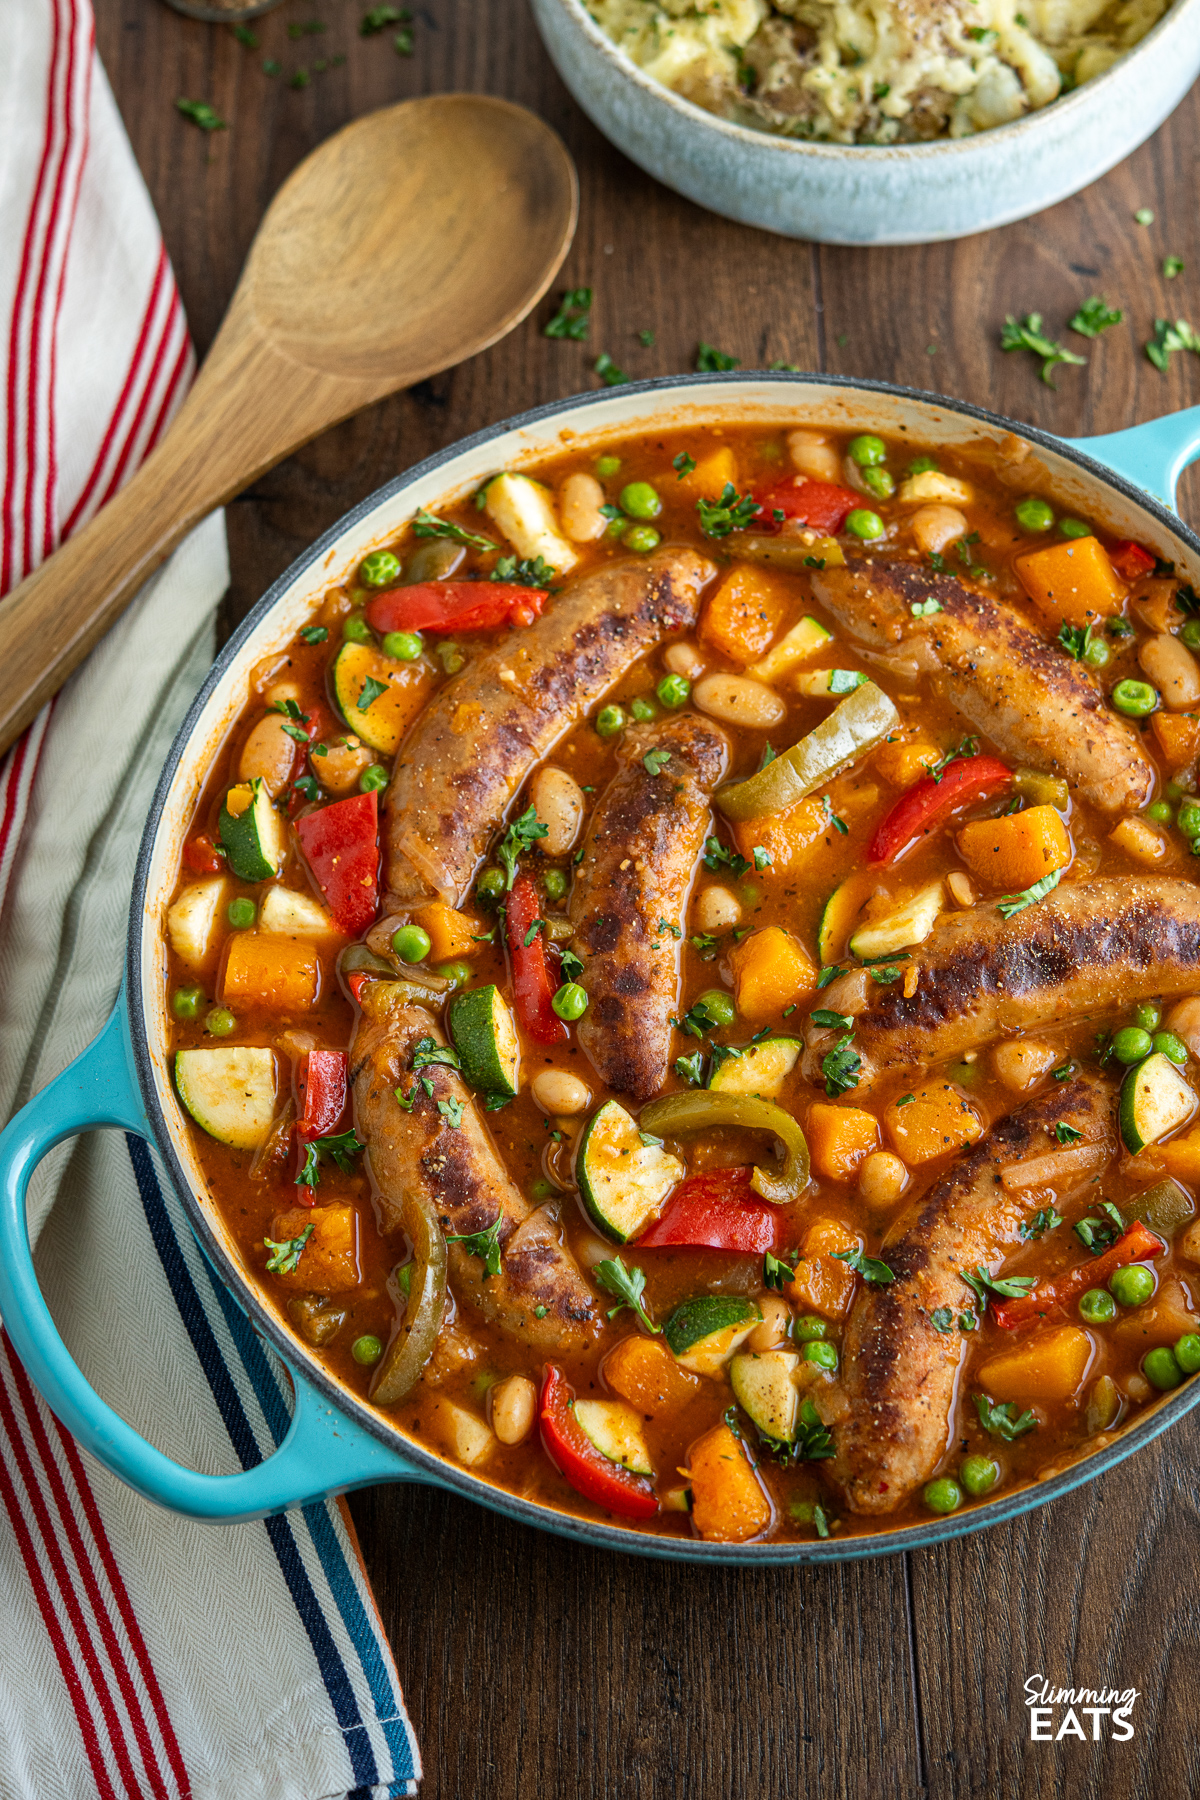 Sausage casserole with a variety of vegetables, presented in a turquoise cast iron pan, accompanied by a wooden spoon resting on the side along with bowl of mashed potatoes